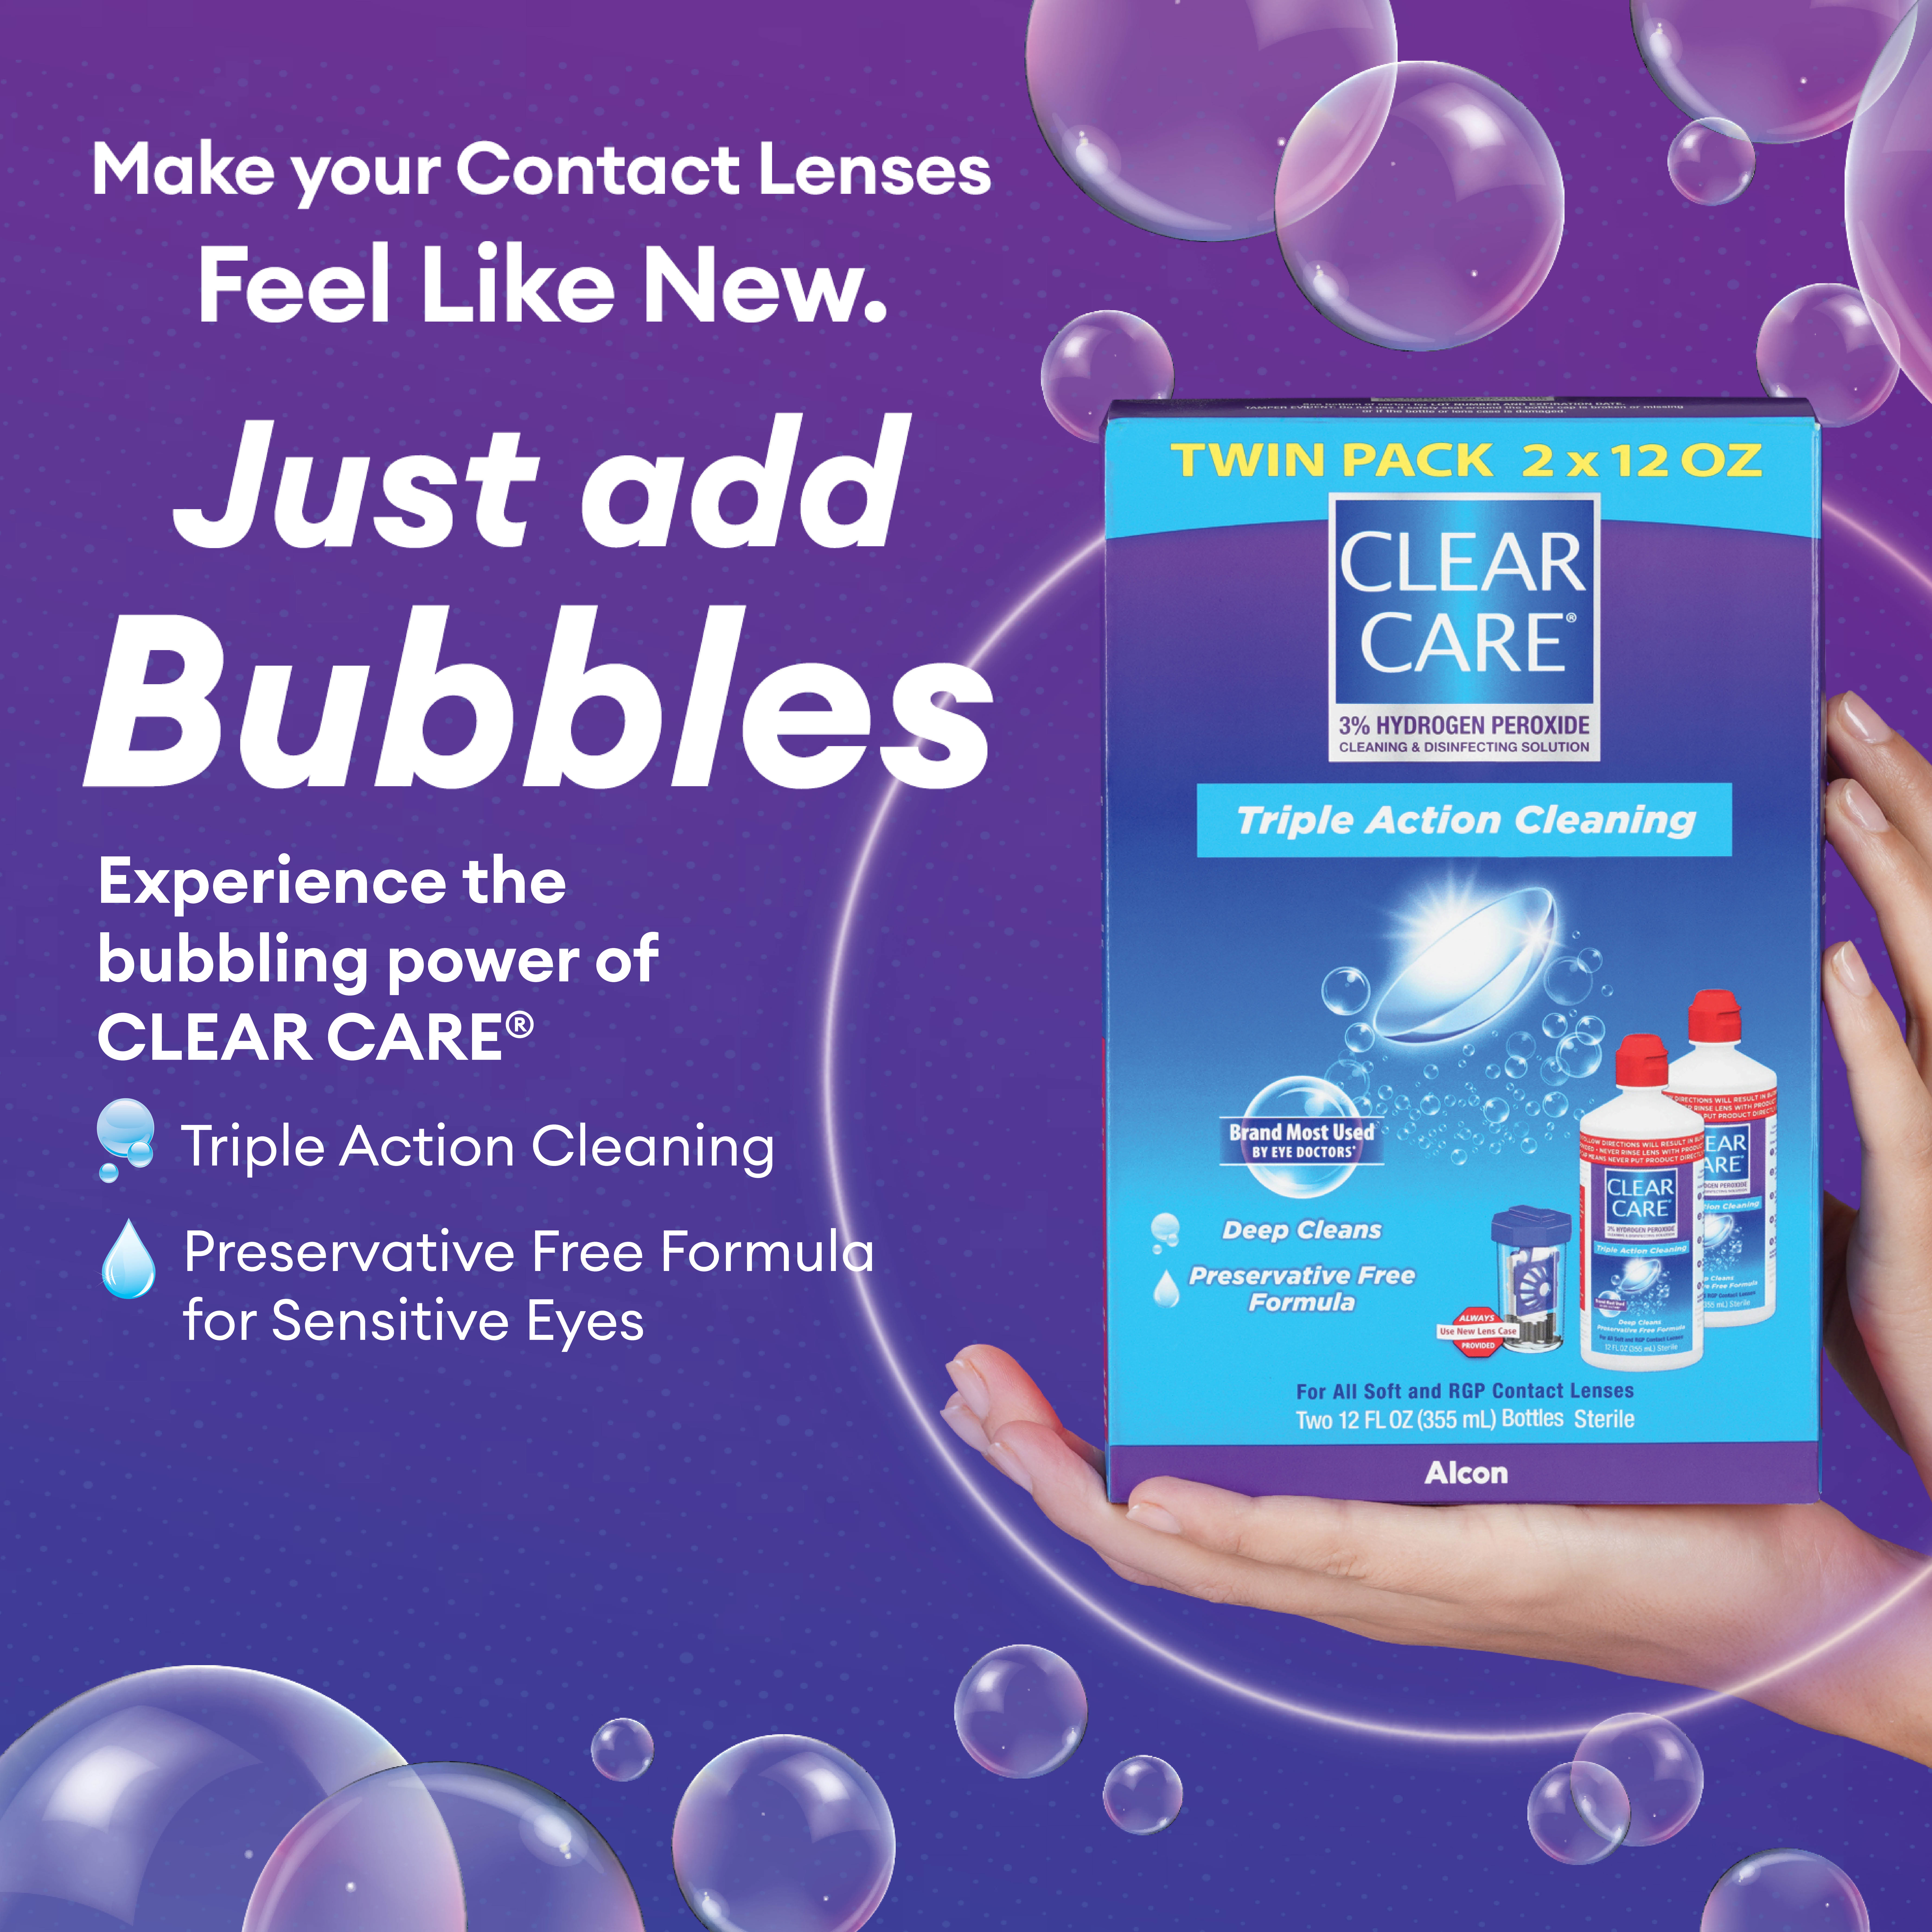 Clear Care Hydrogen Peroxide Contact Lens Cleaning and Disinfecting Liquid Solution, Two 12 oz per pack - image 4 of 9